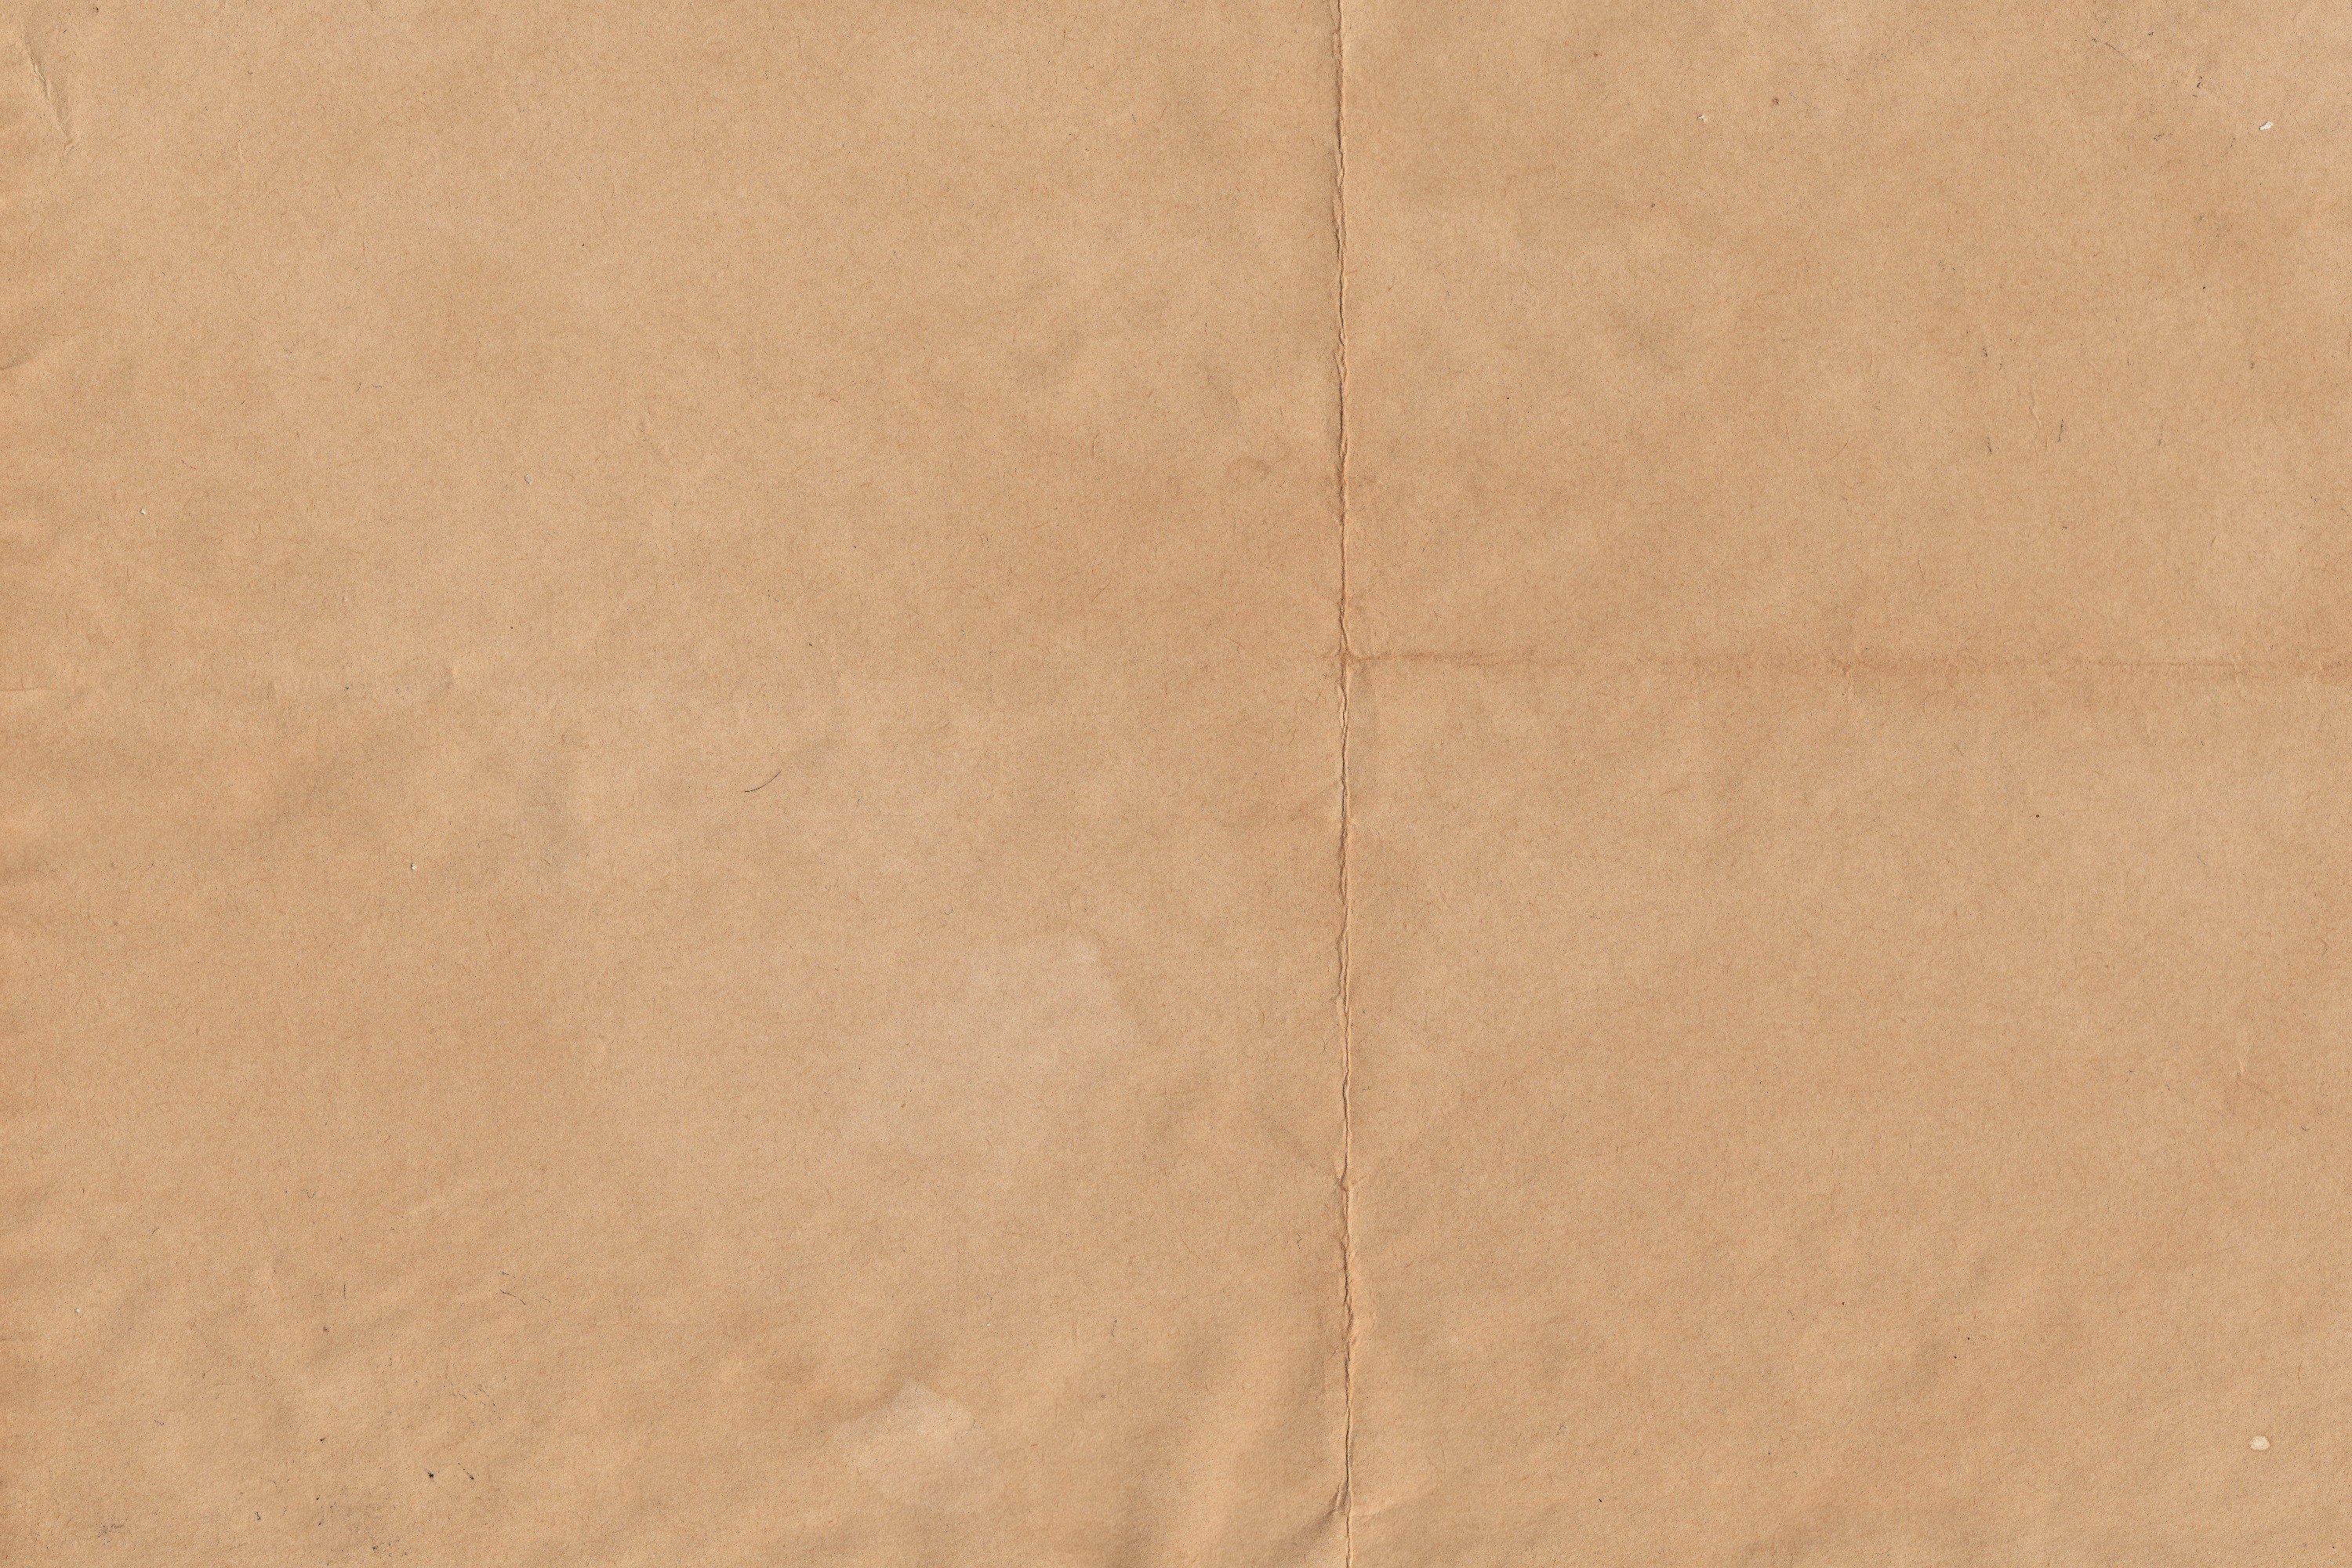 This texture is part of the set “Coffee&Paper”, you can check full package here: https://bit.ly/36EVP3Y